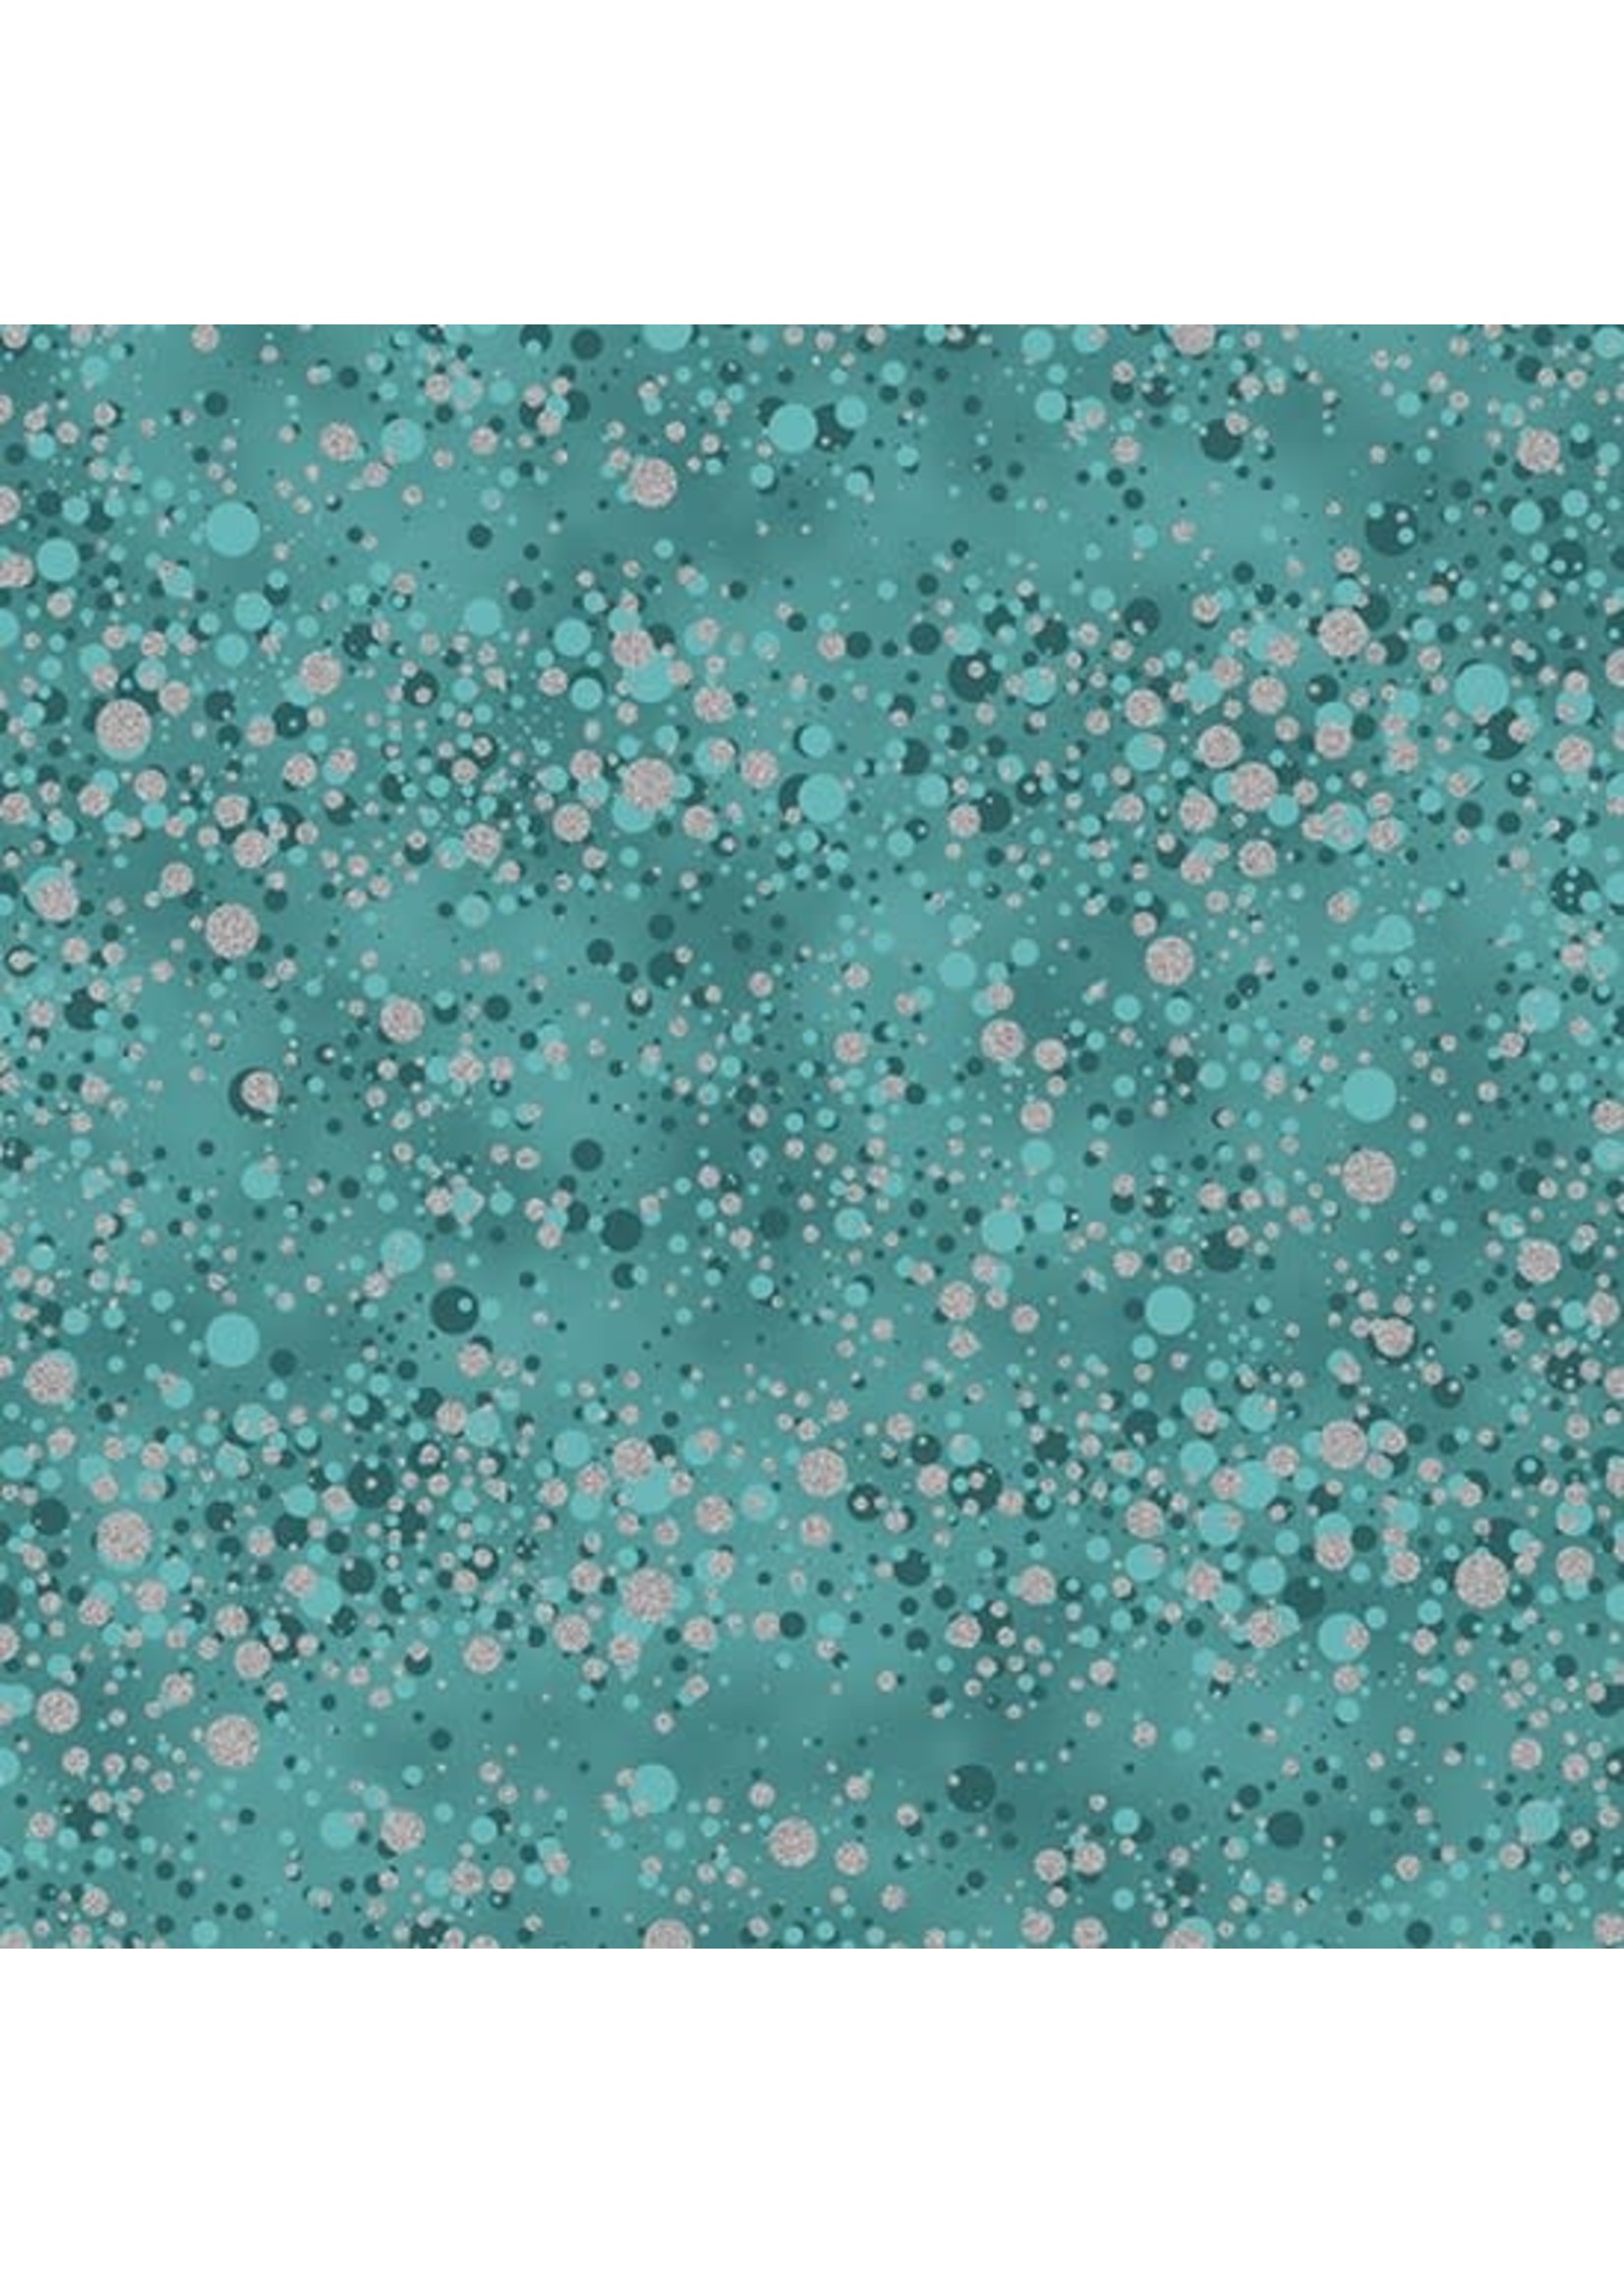 Hoffman Fabrics Fly Home for Winter - Turquoise Silver - U4975 - 61S